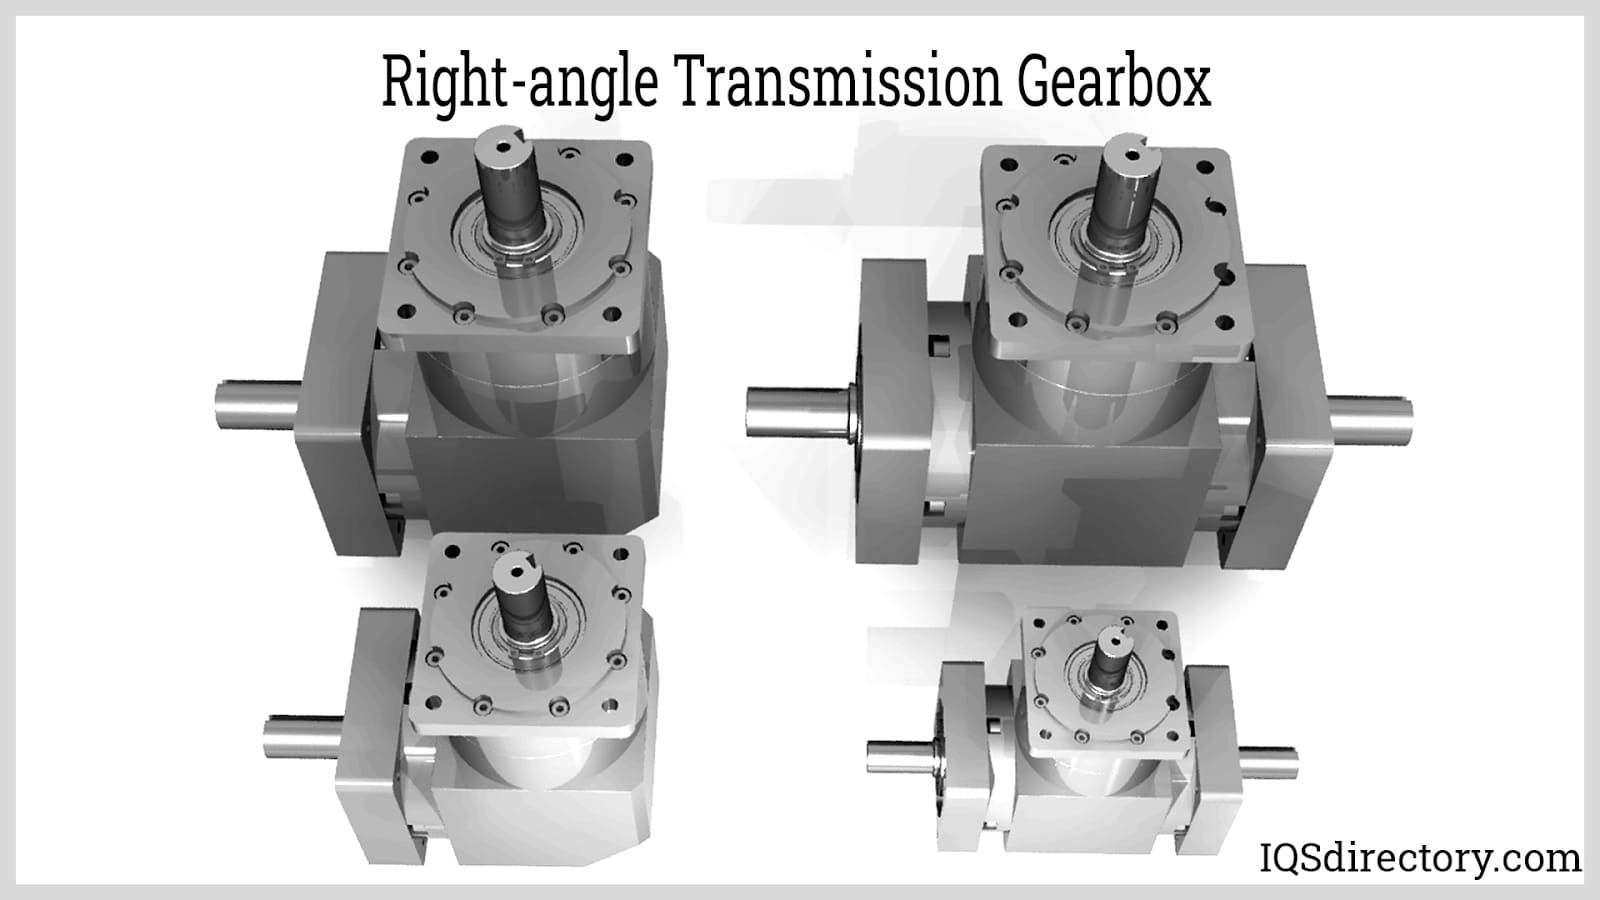 Right-angle Transmission Gearbox